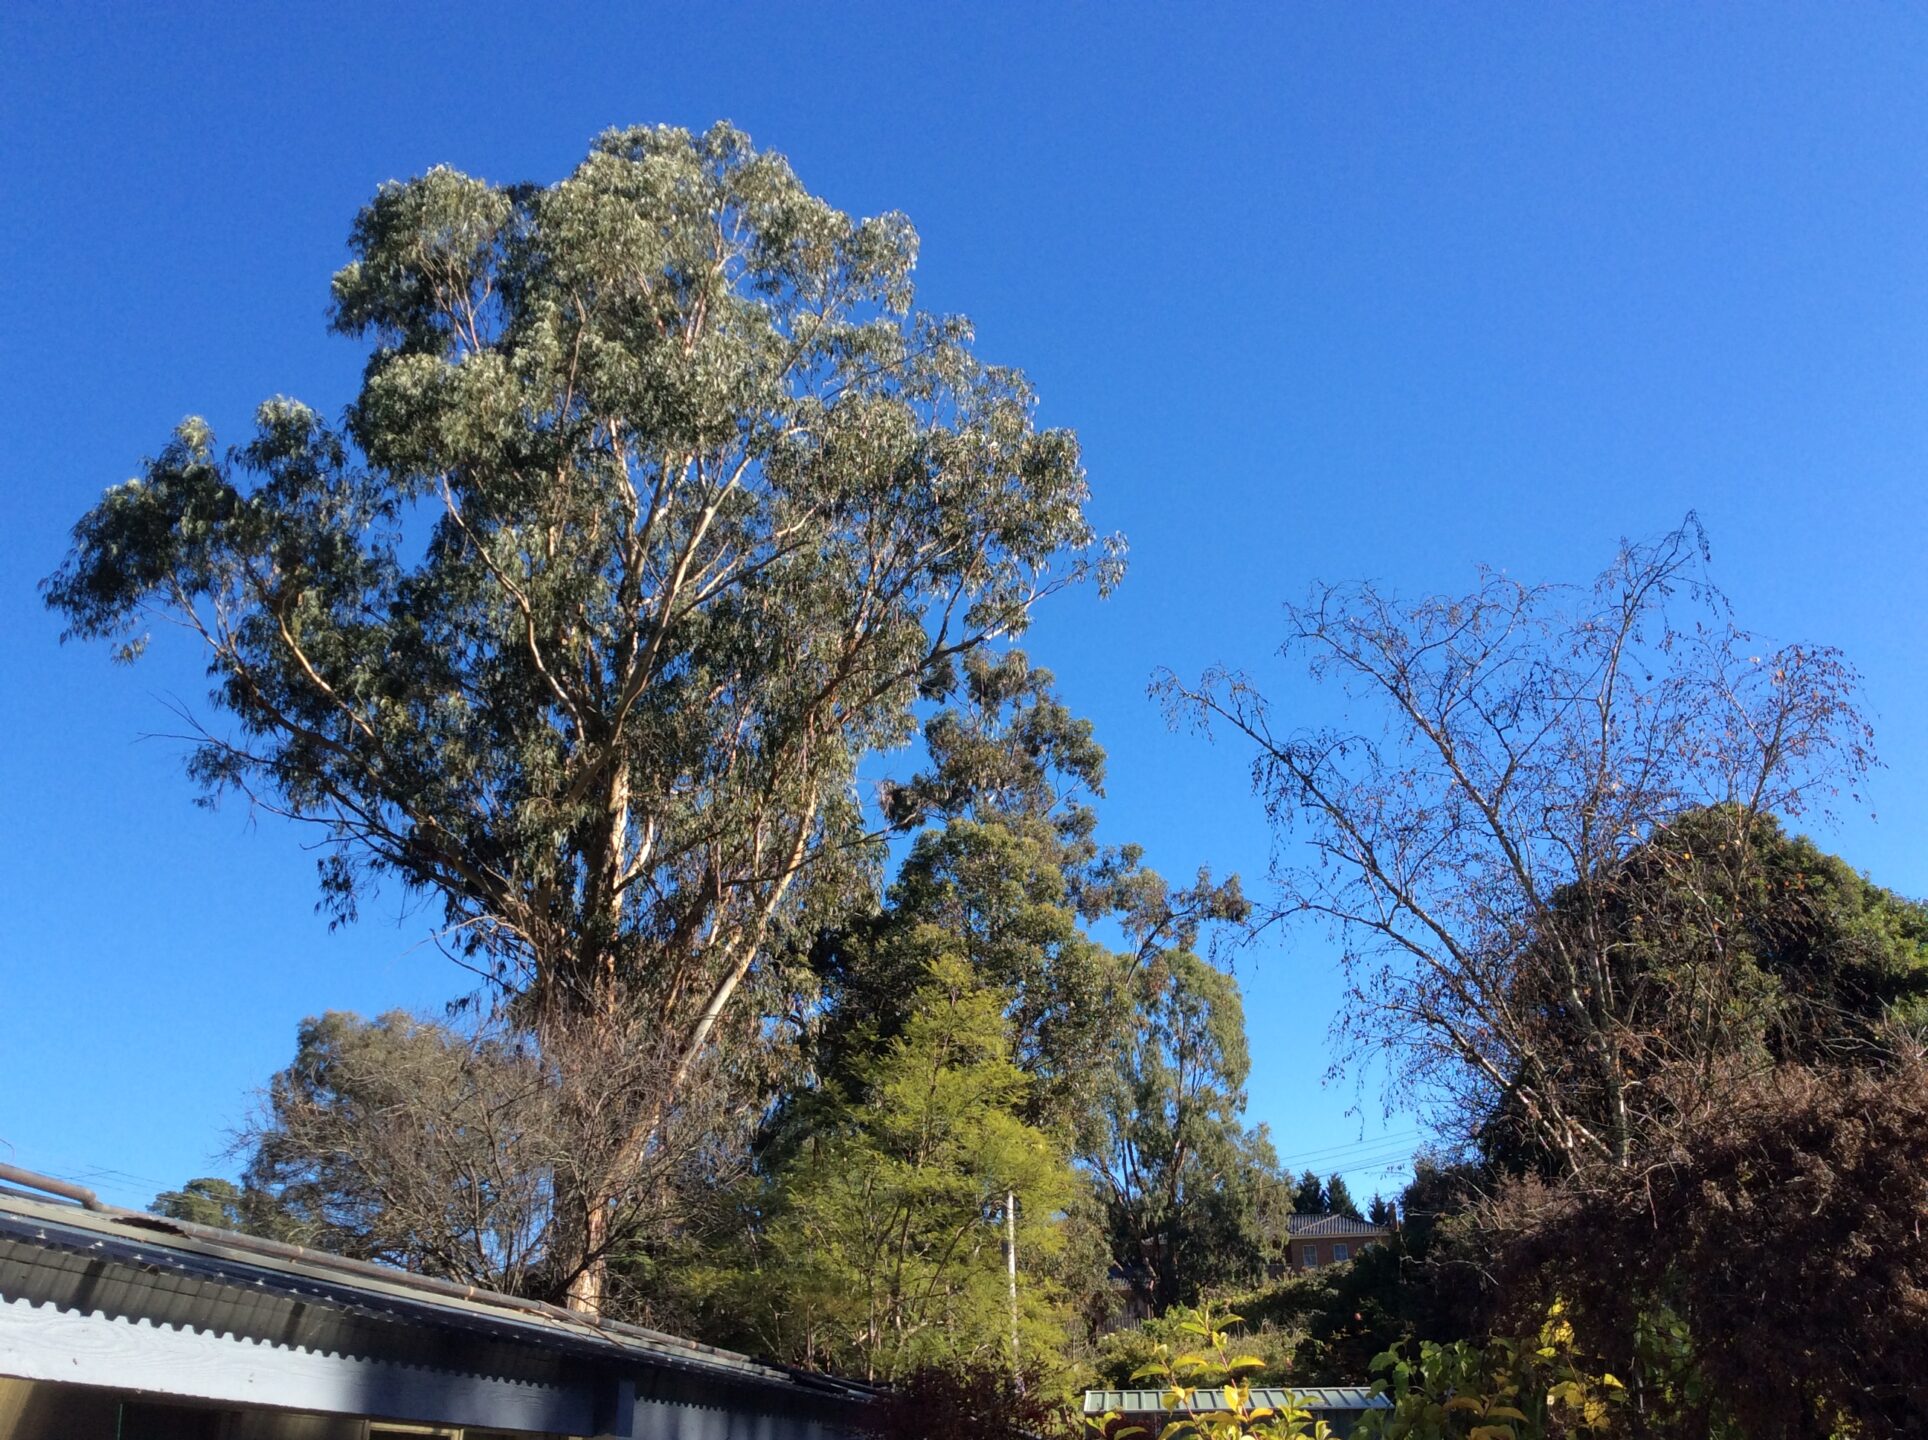 A photo of a large gum tree with a clear blue sky behind it